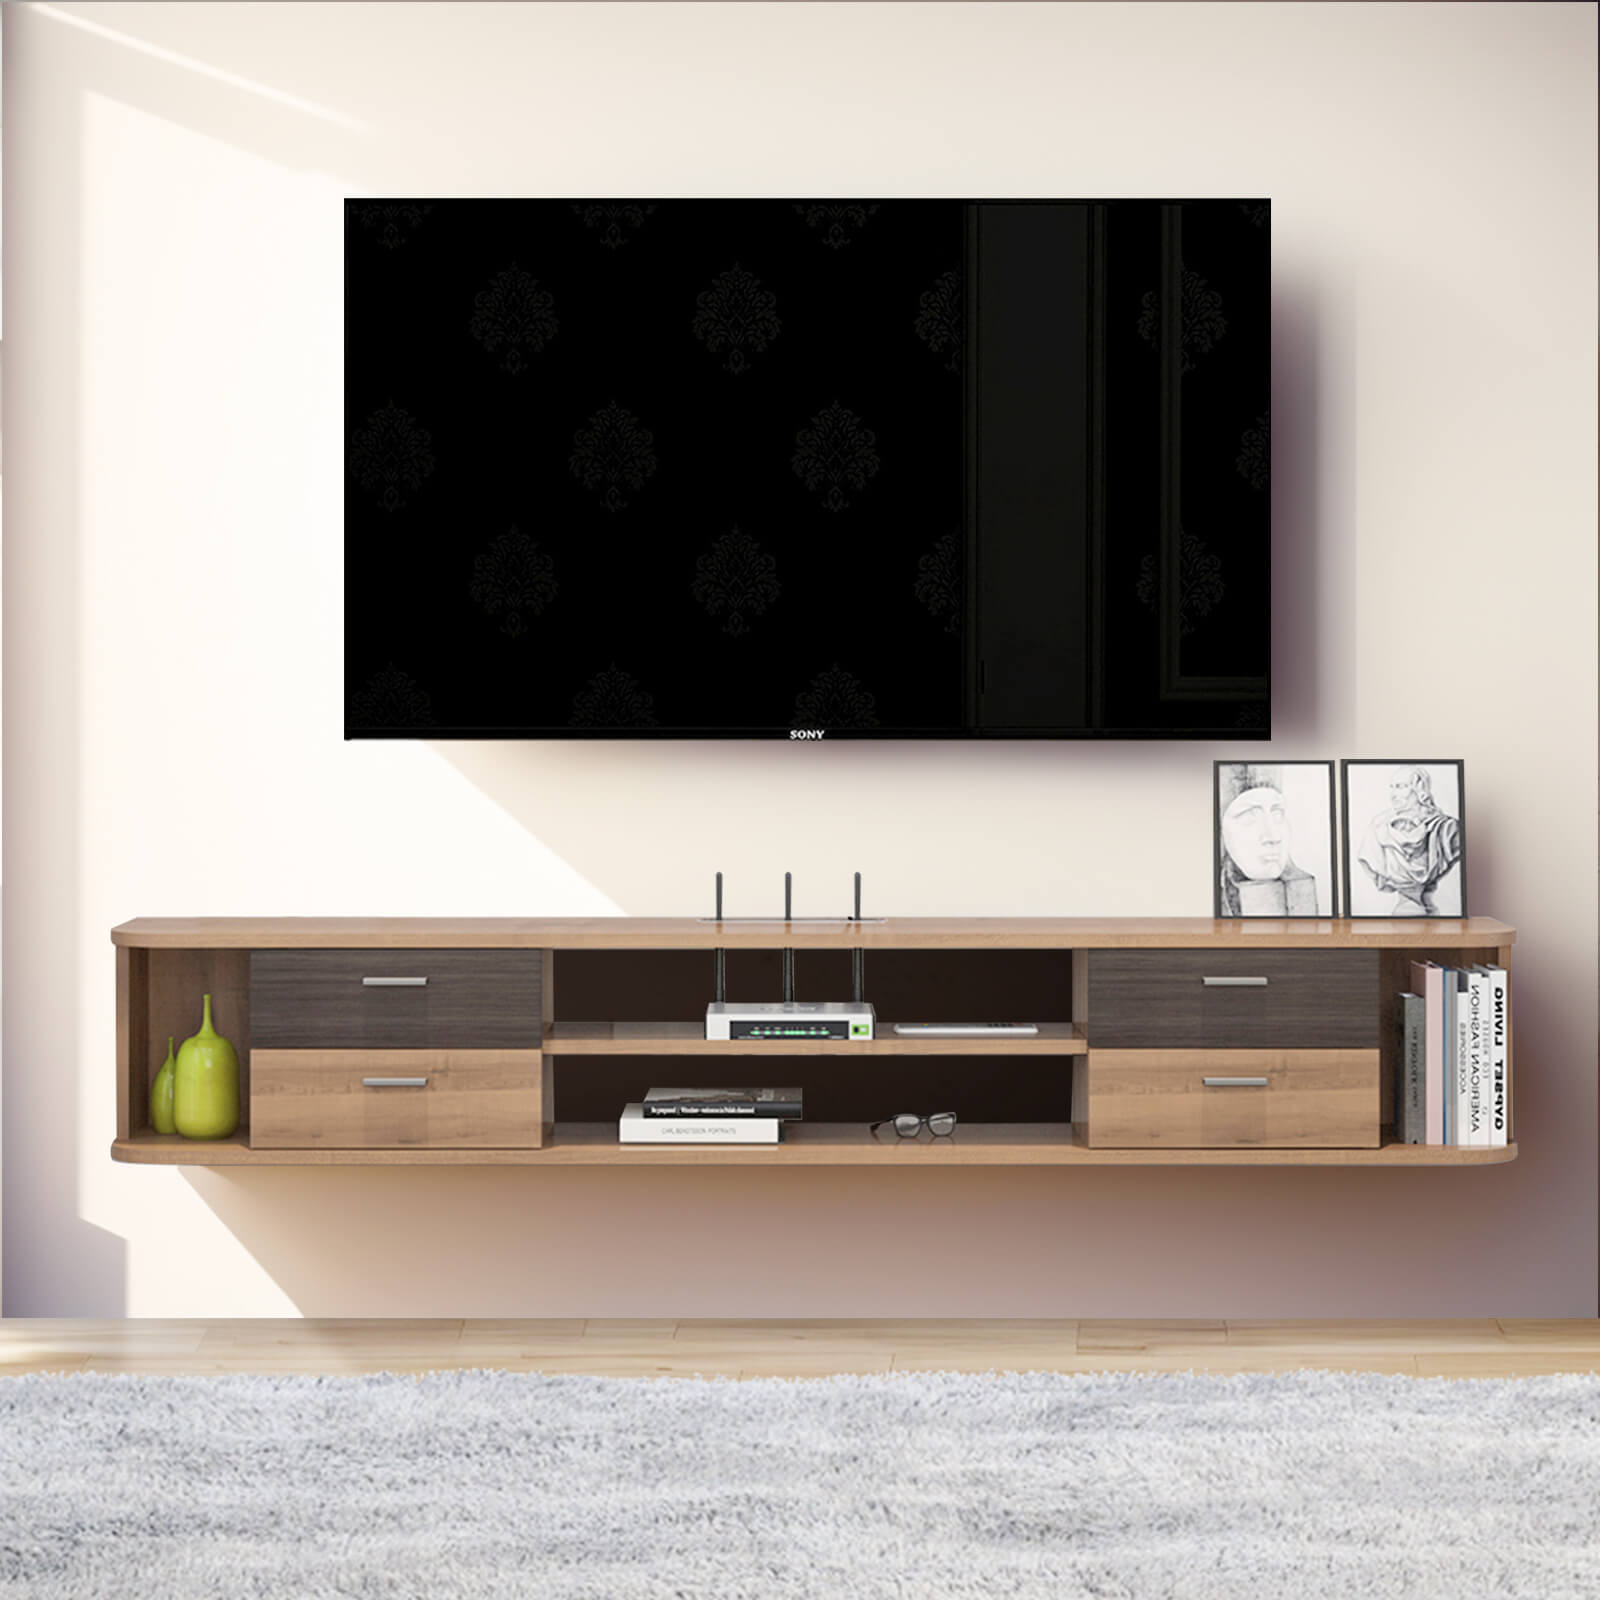 66.9" Plywood Floating TV Stand Shelf with Four Drawers for 70" 75" Televisions, Walnut